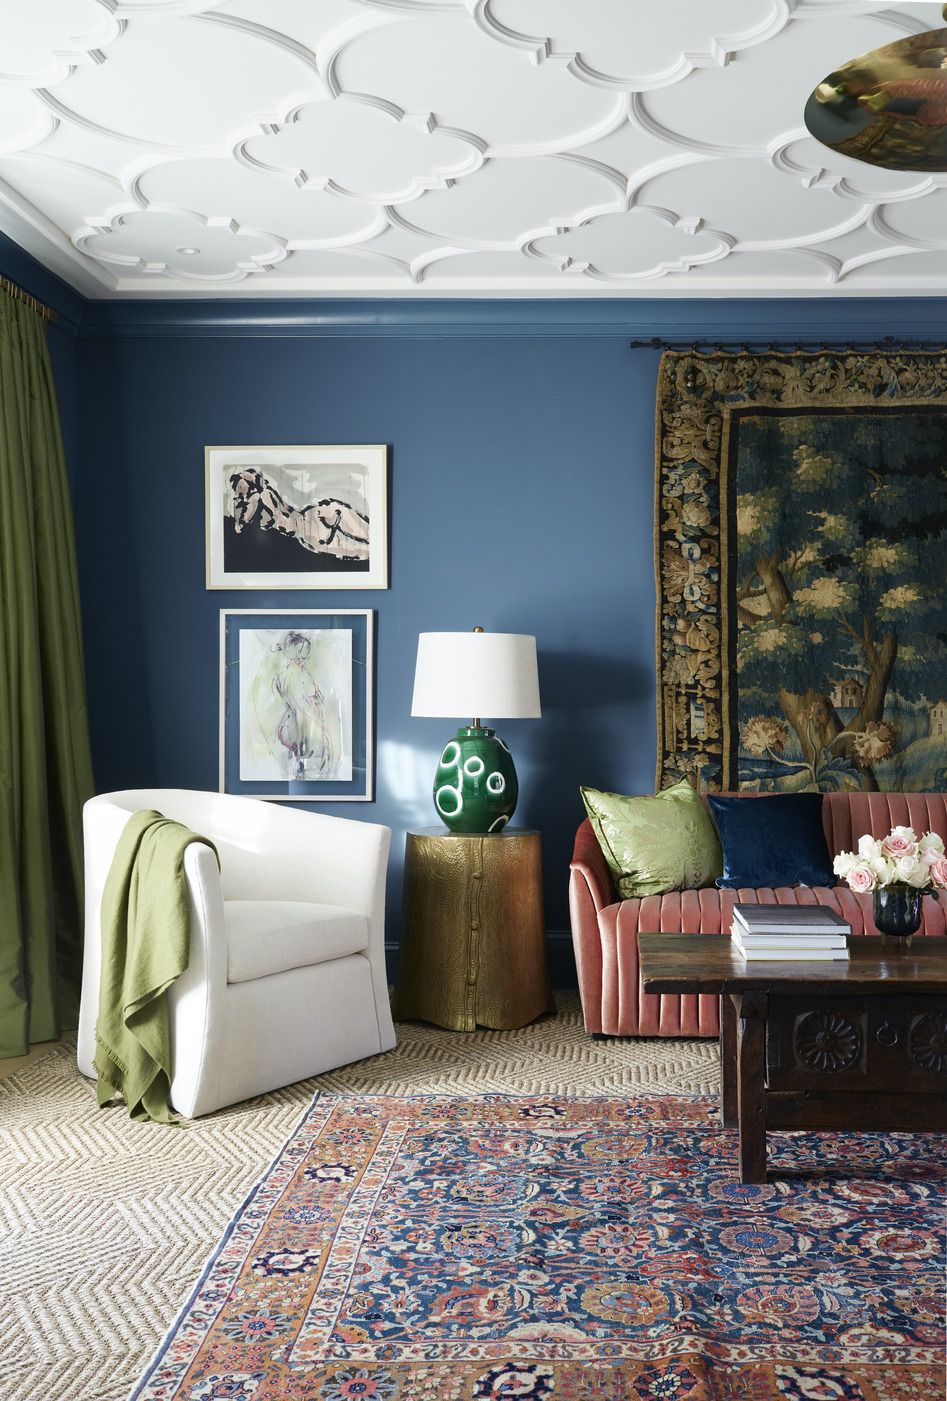 45 Best Blue Rooms - Decor Ideas for Light and Dark Blue Rooms